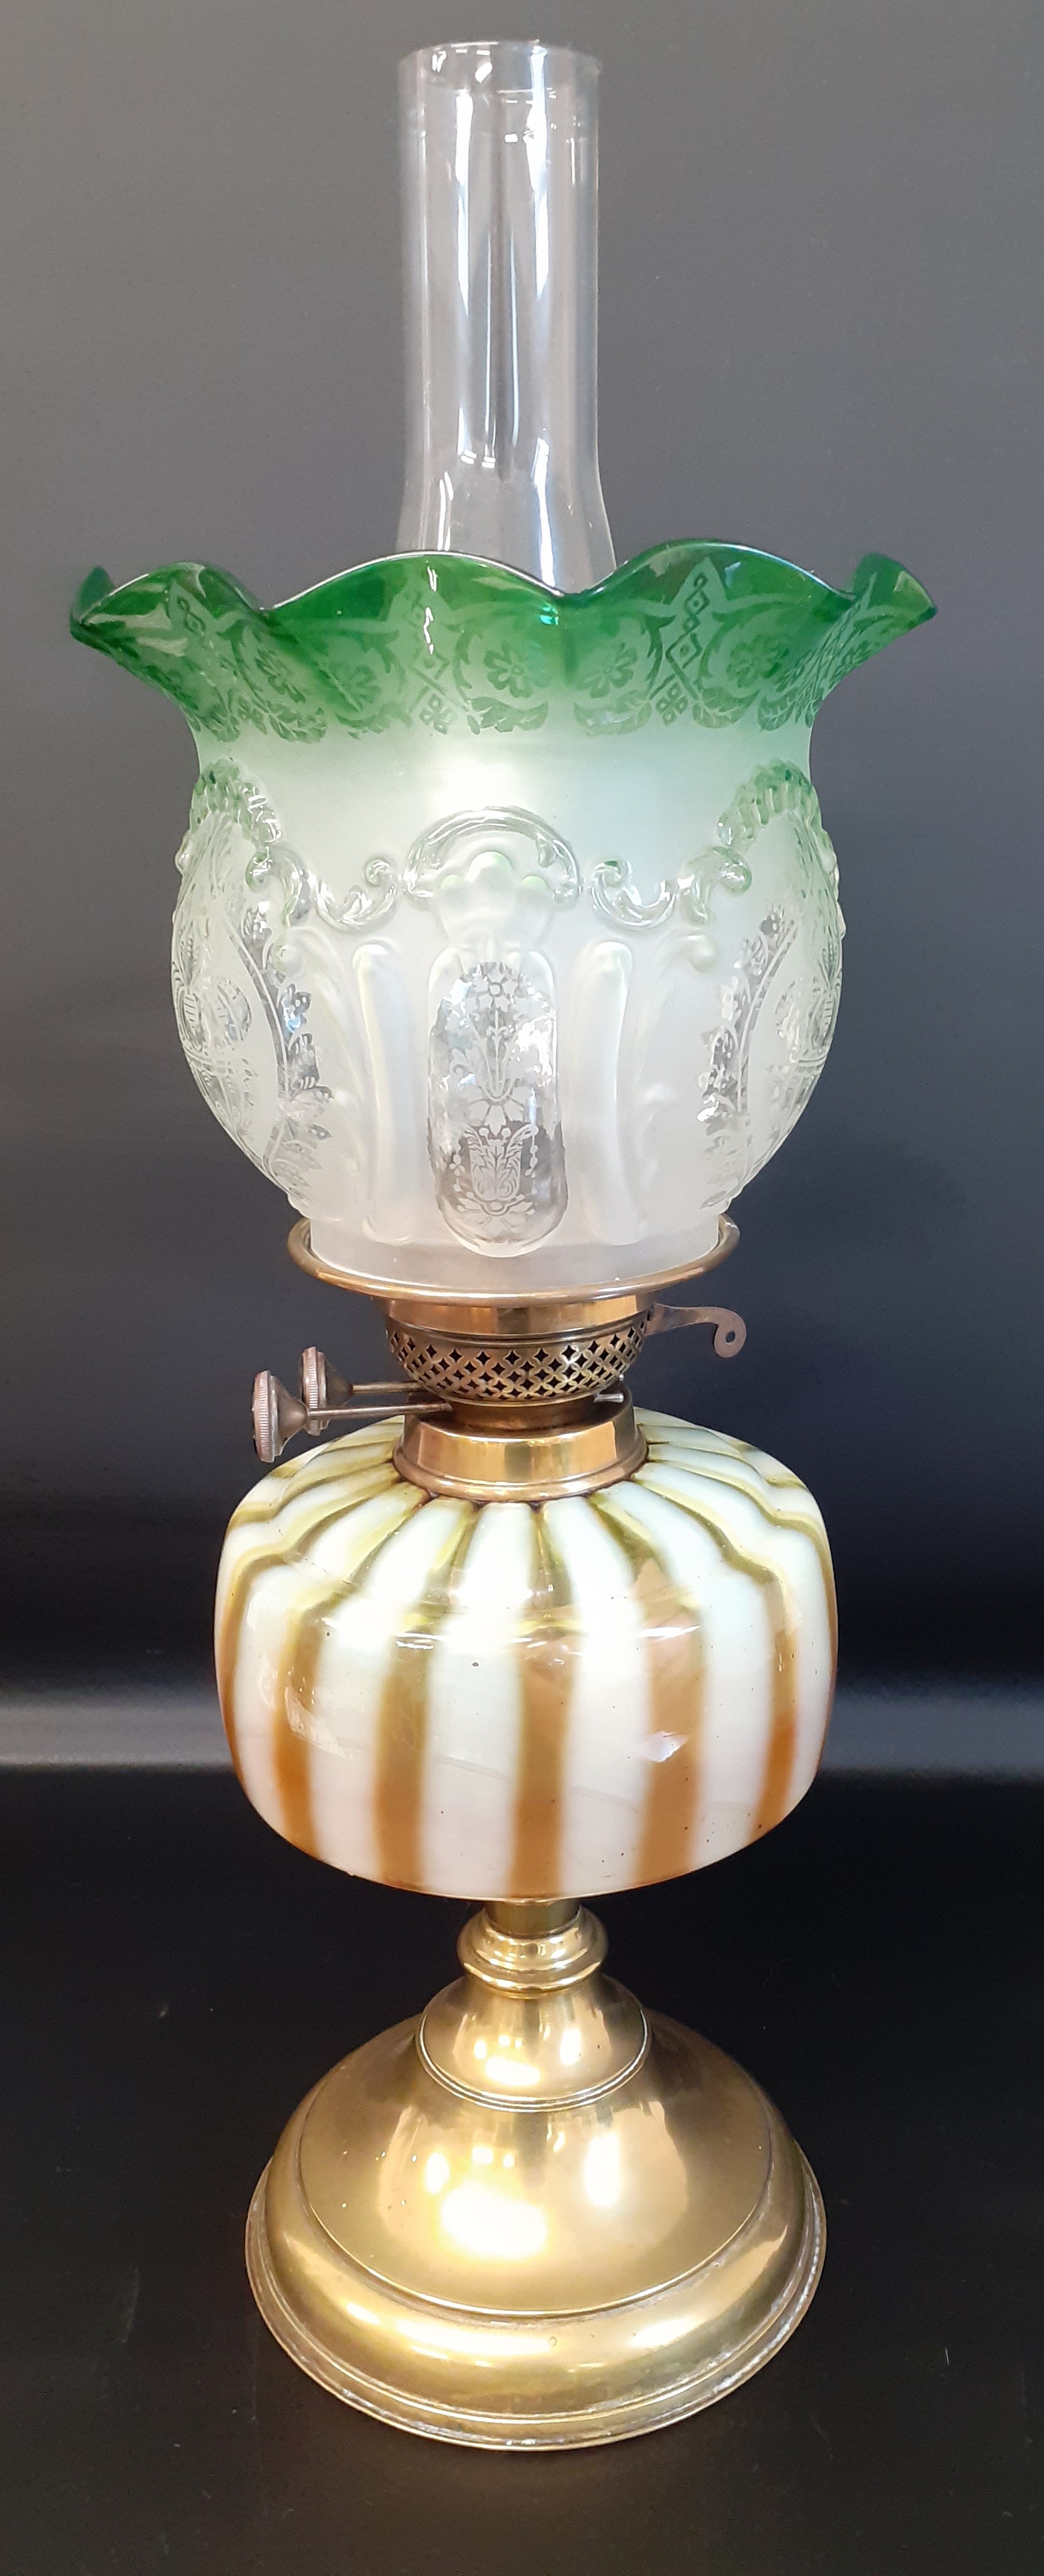 19th century brass paraffin lamp with glass reservoir & green etched glass shade 55cm